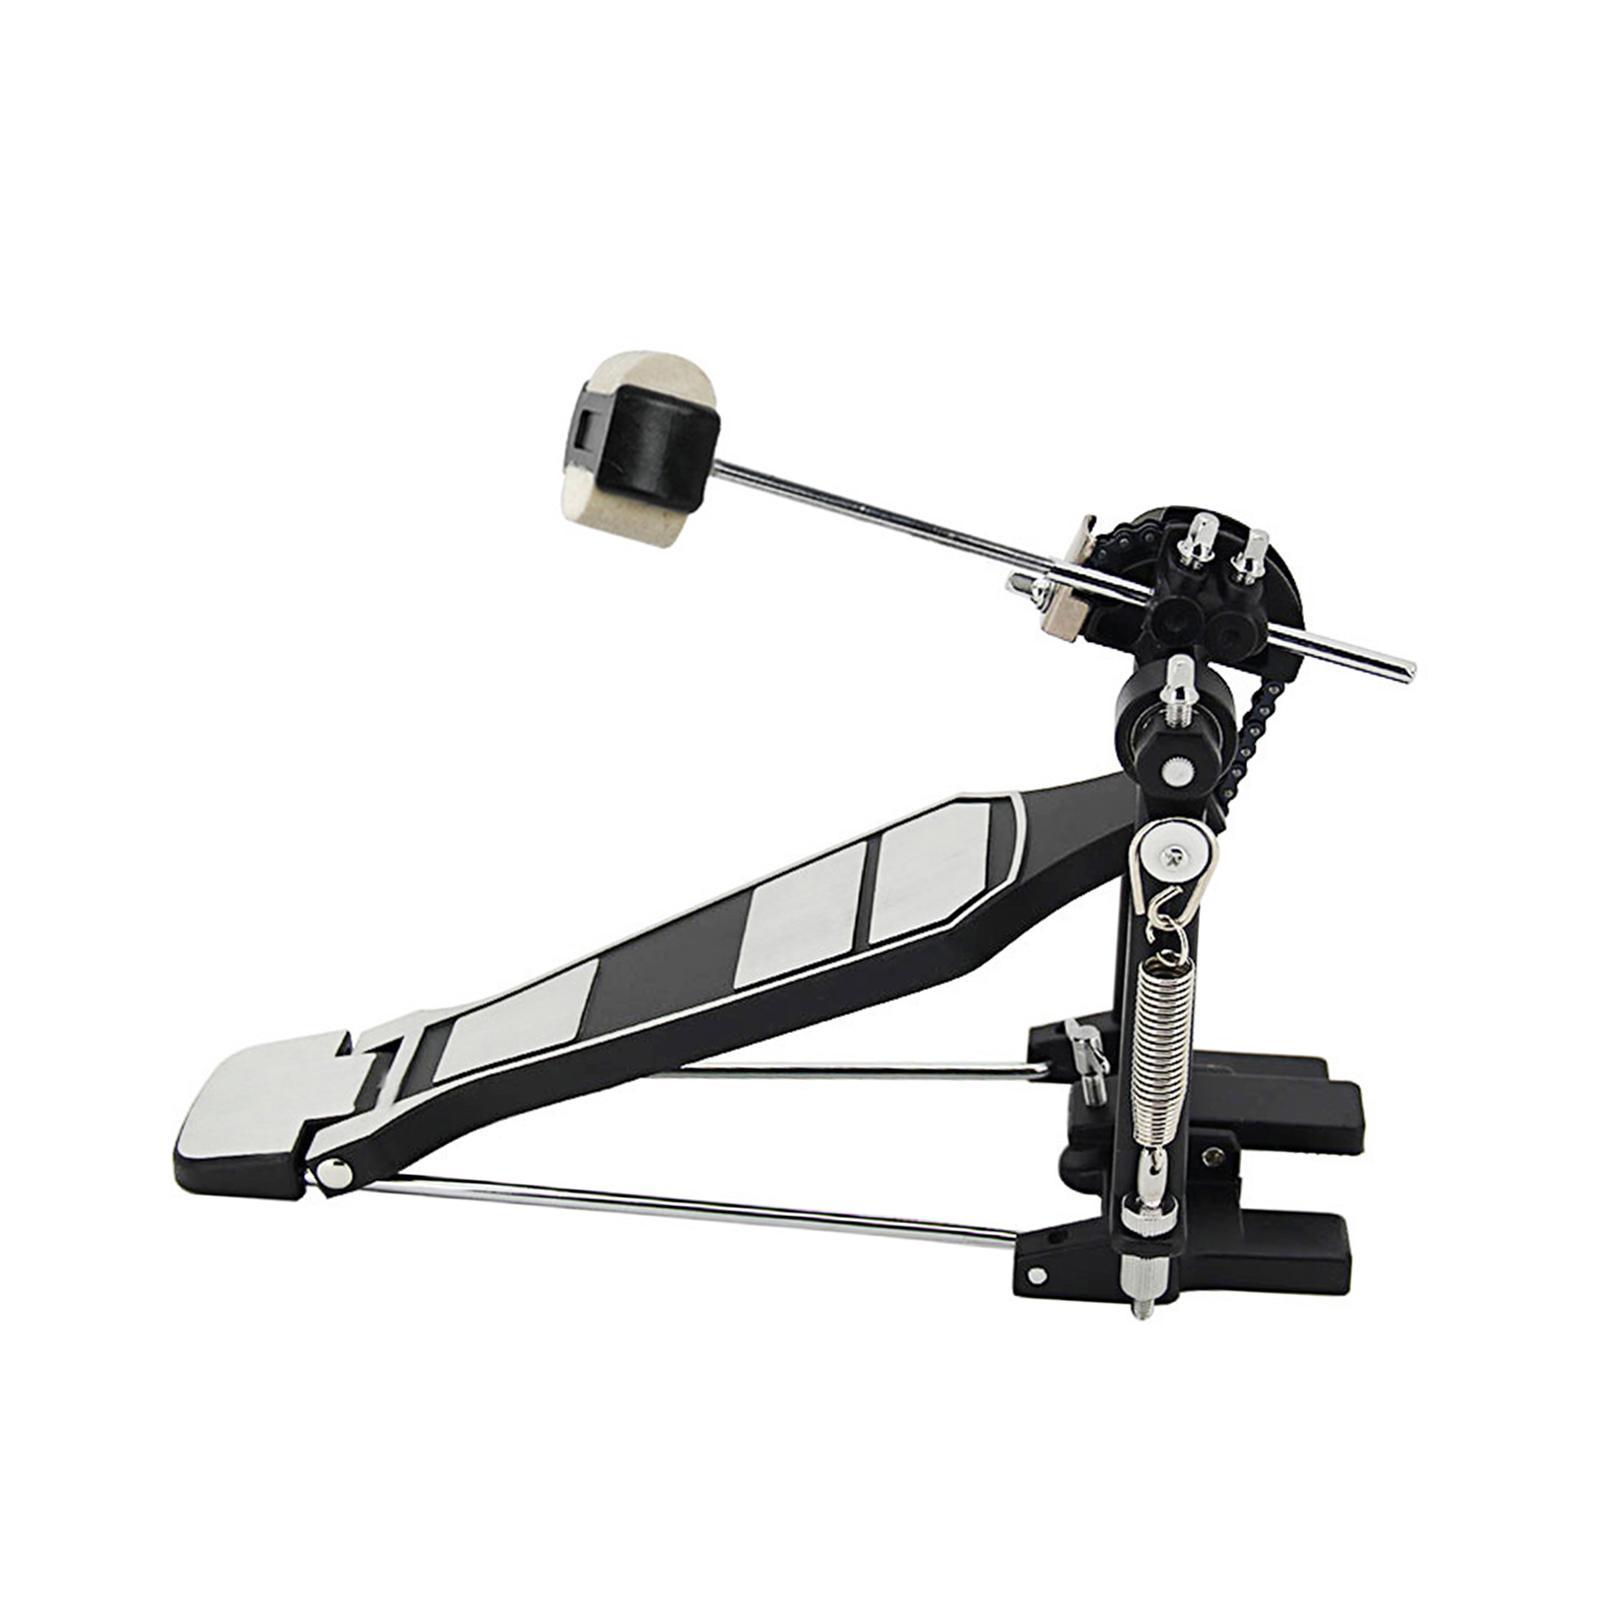 Bass Drum Pedal, Double Chain Drive Brass Pedal, Professional Durable